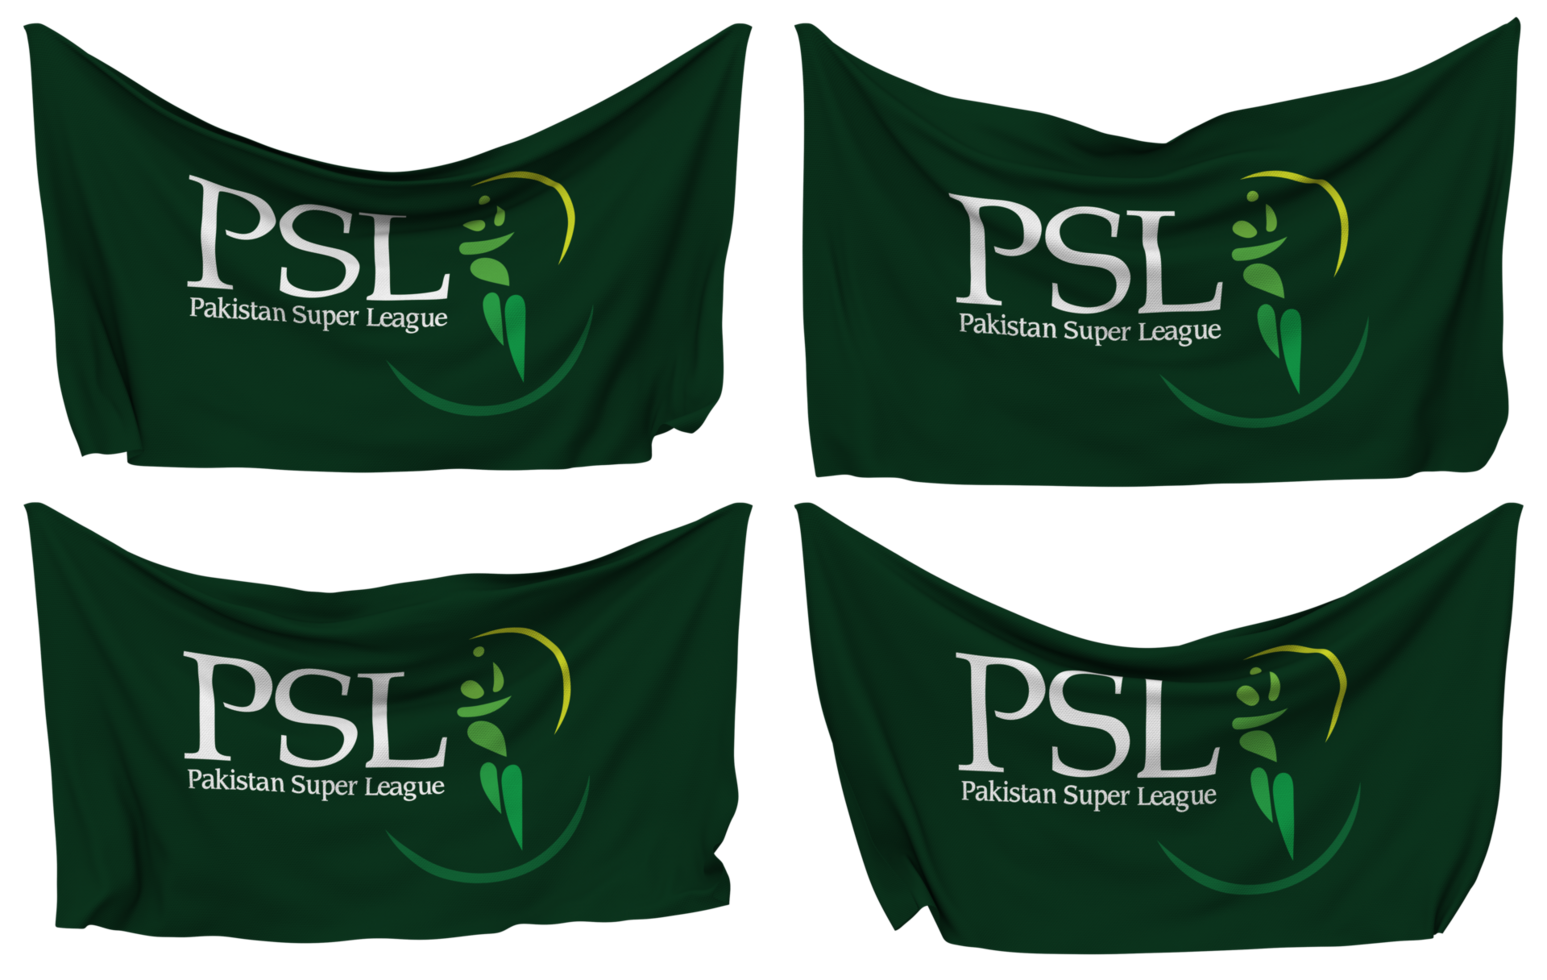 Pakistan Super League, PSL Pinned Flag from Corners, Isolated with Different Waving Variations, 3D Rendering png